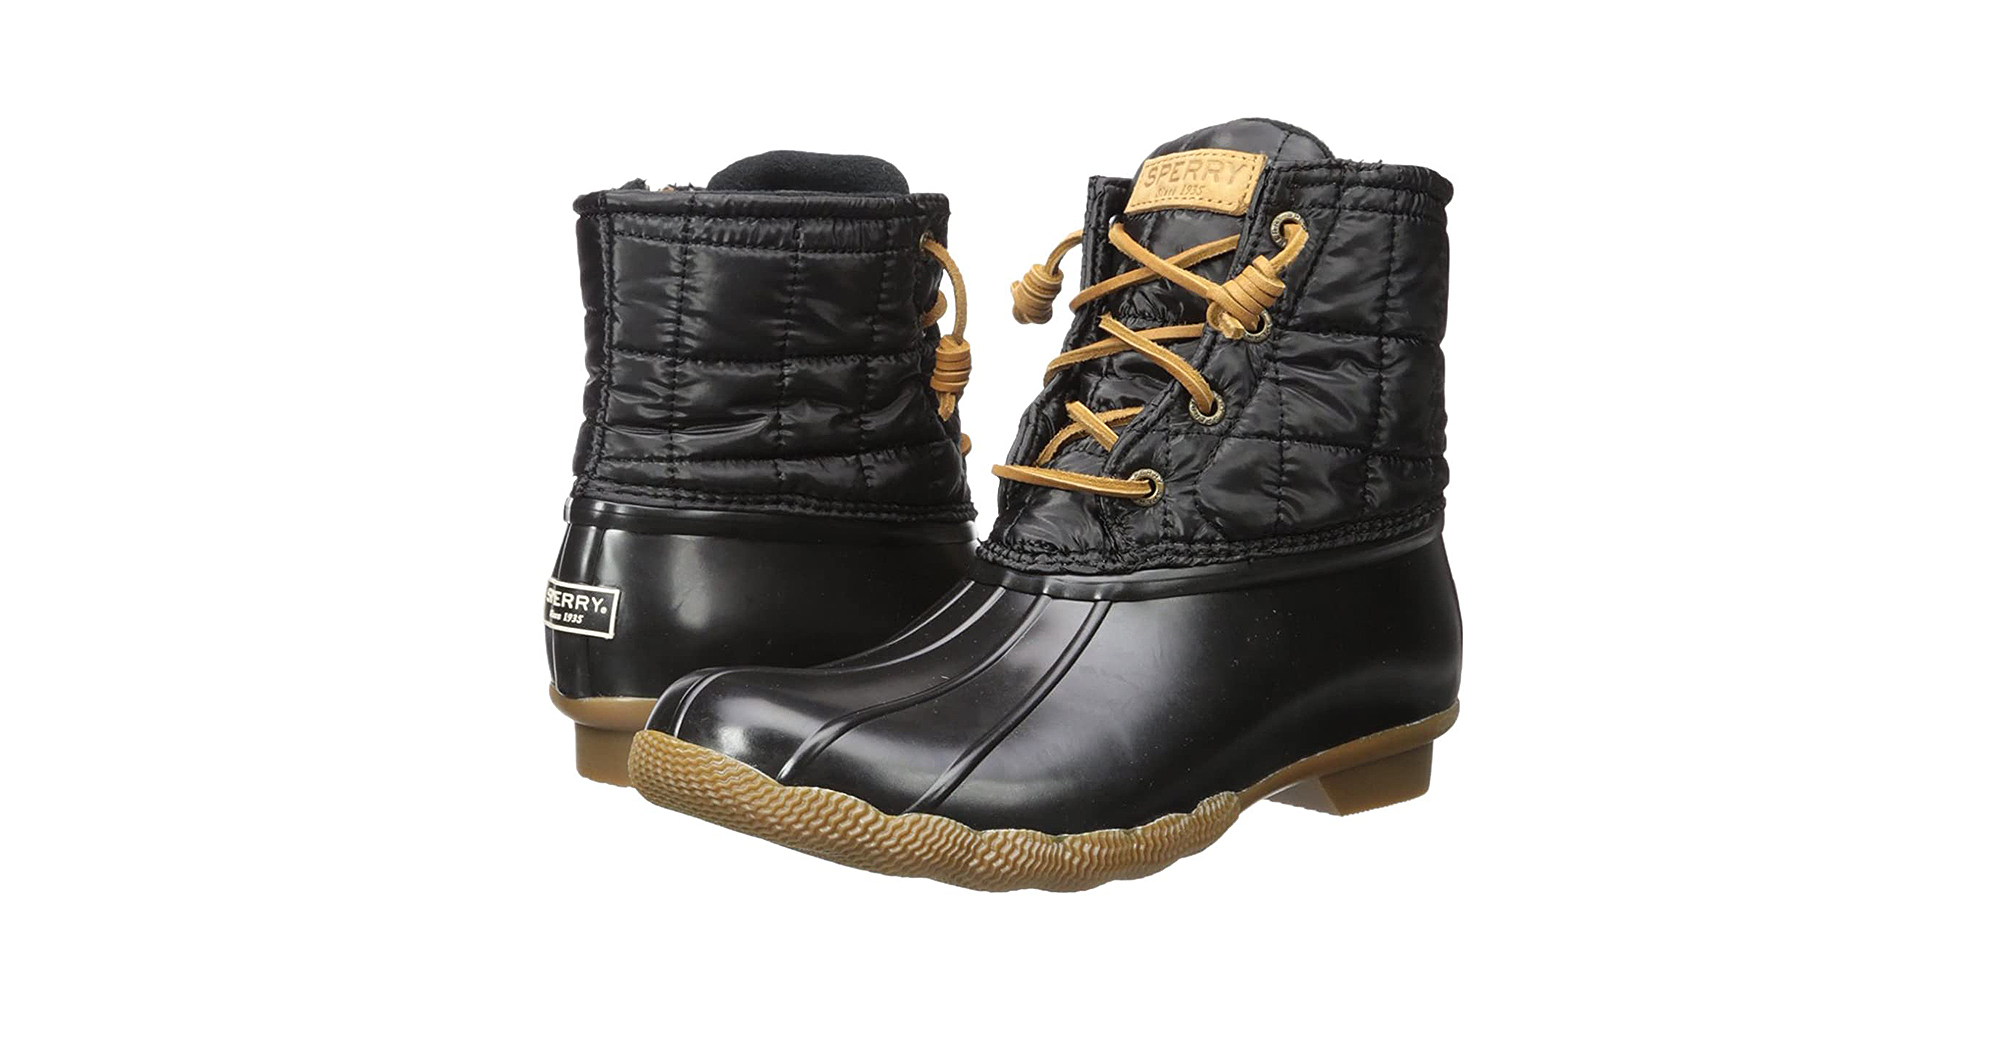 sperry duck boots black friday sale